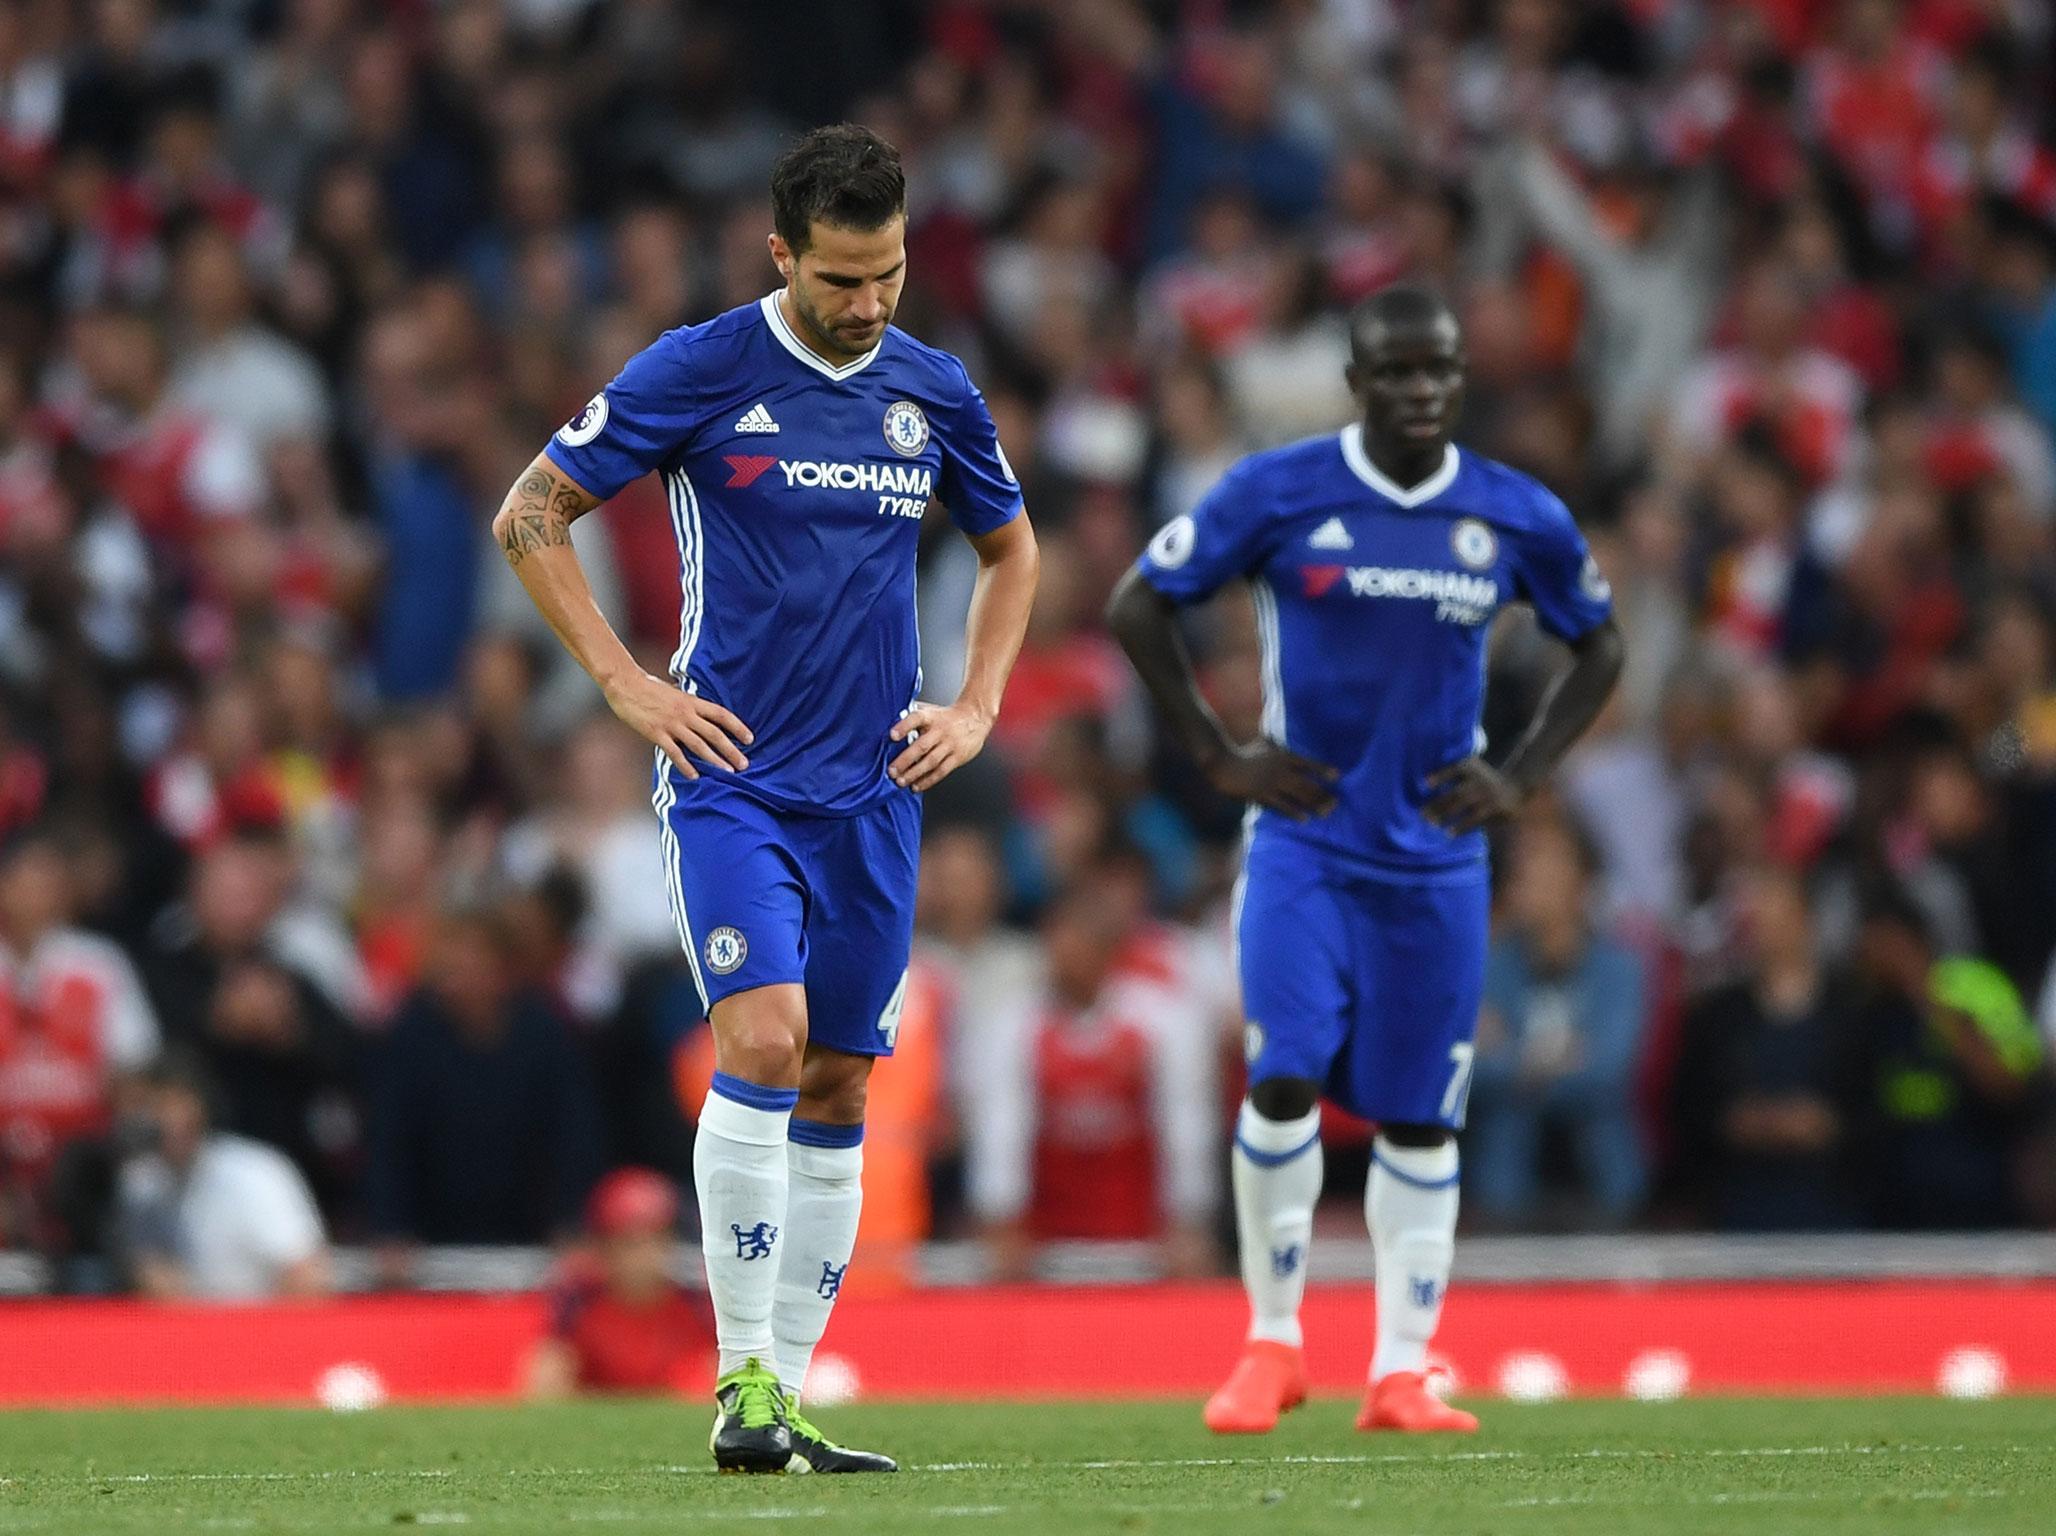 Chelsea bounced back from defeat at the Emirates to storm to the title